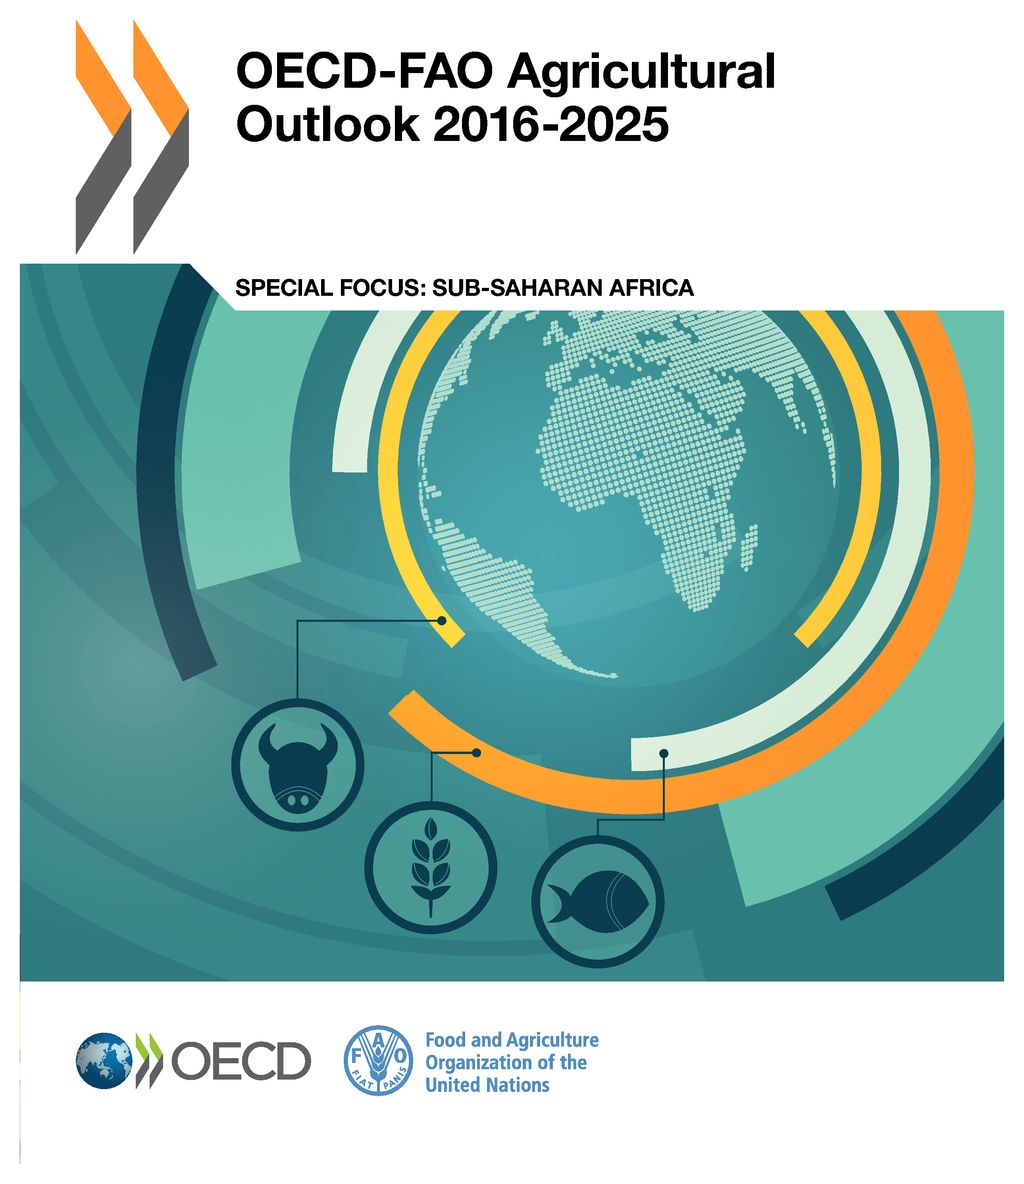 OECD-FAO agricultural outlook 2016-2025 책표지